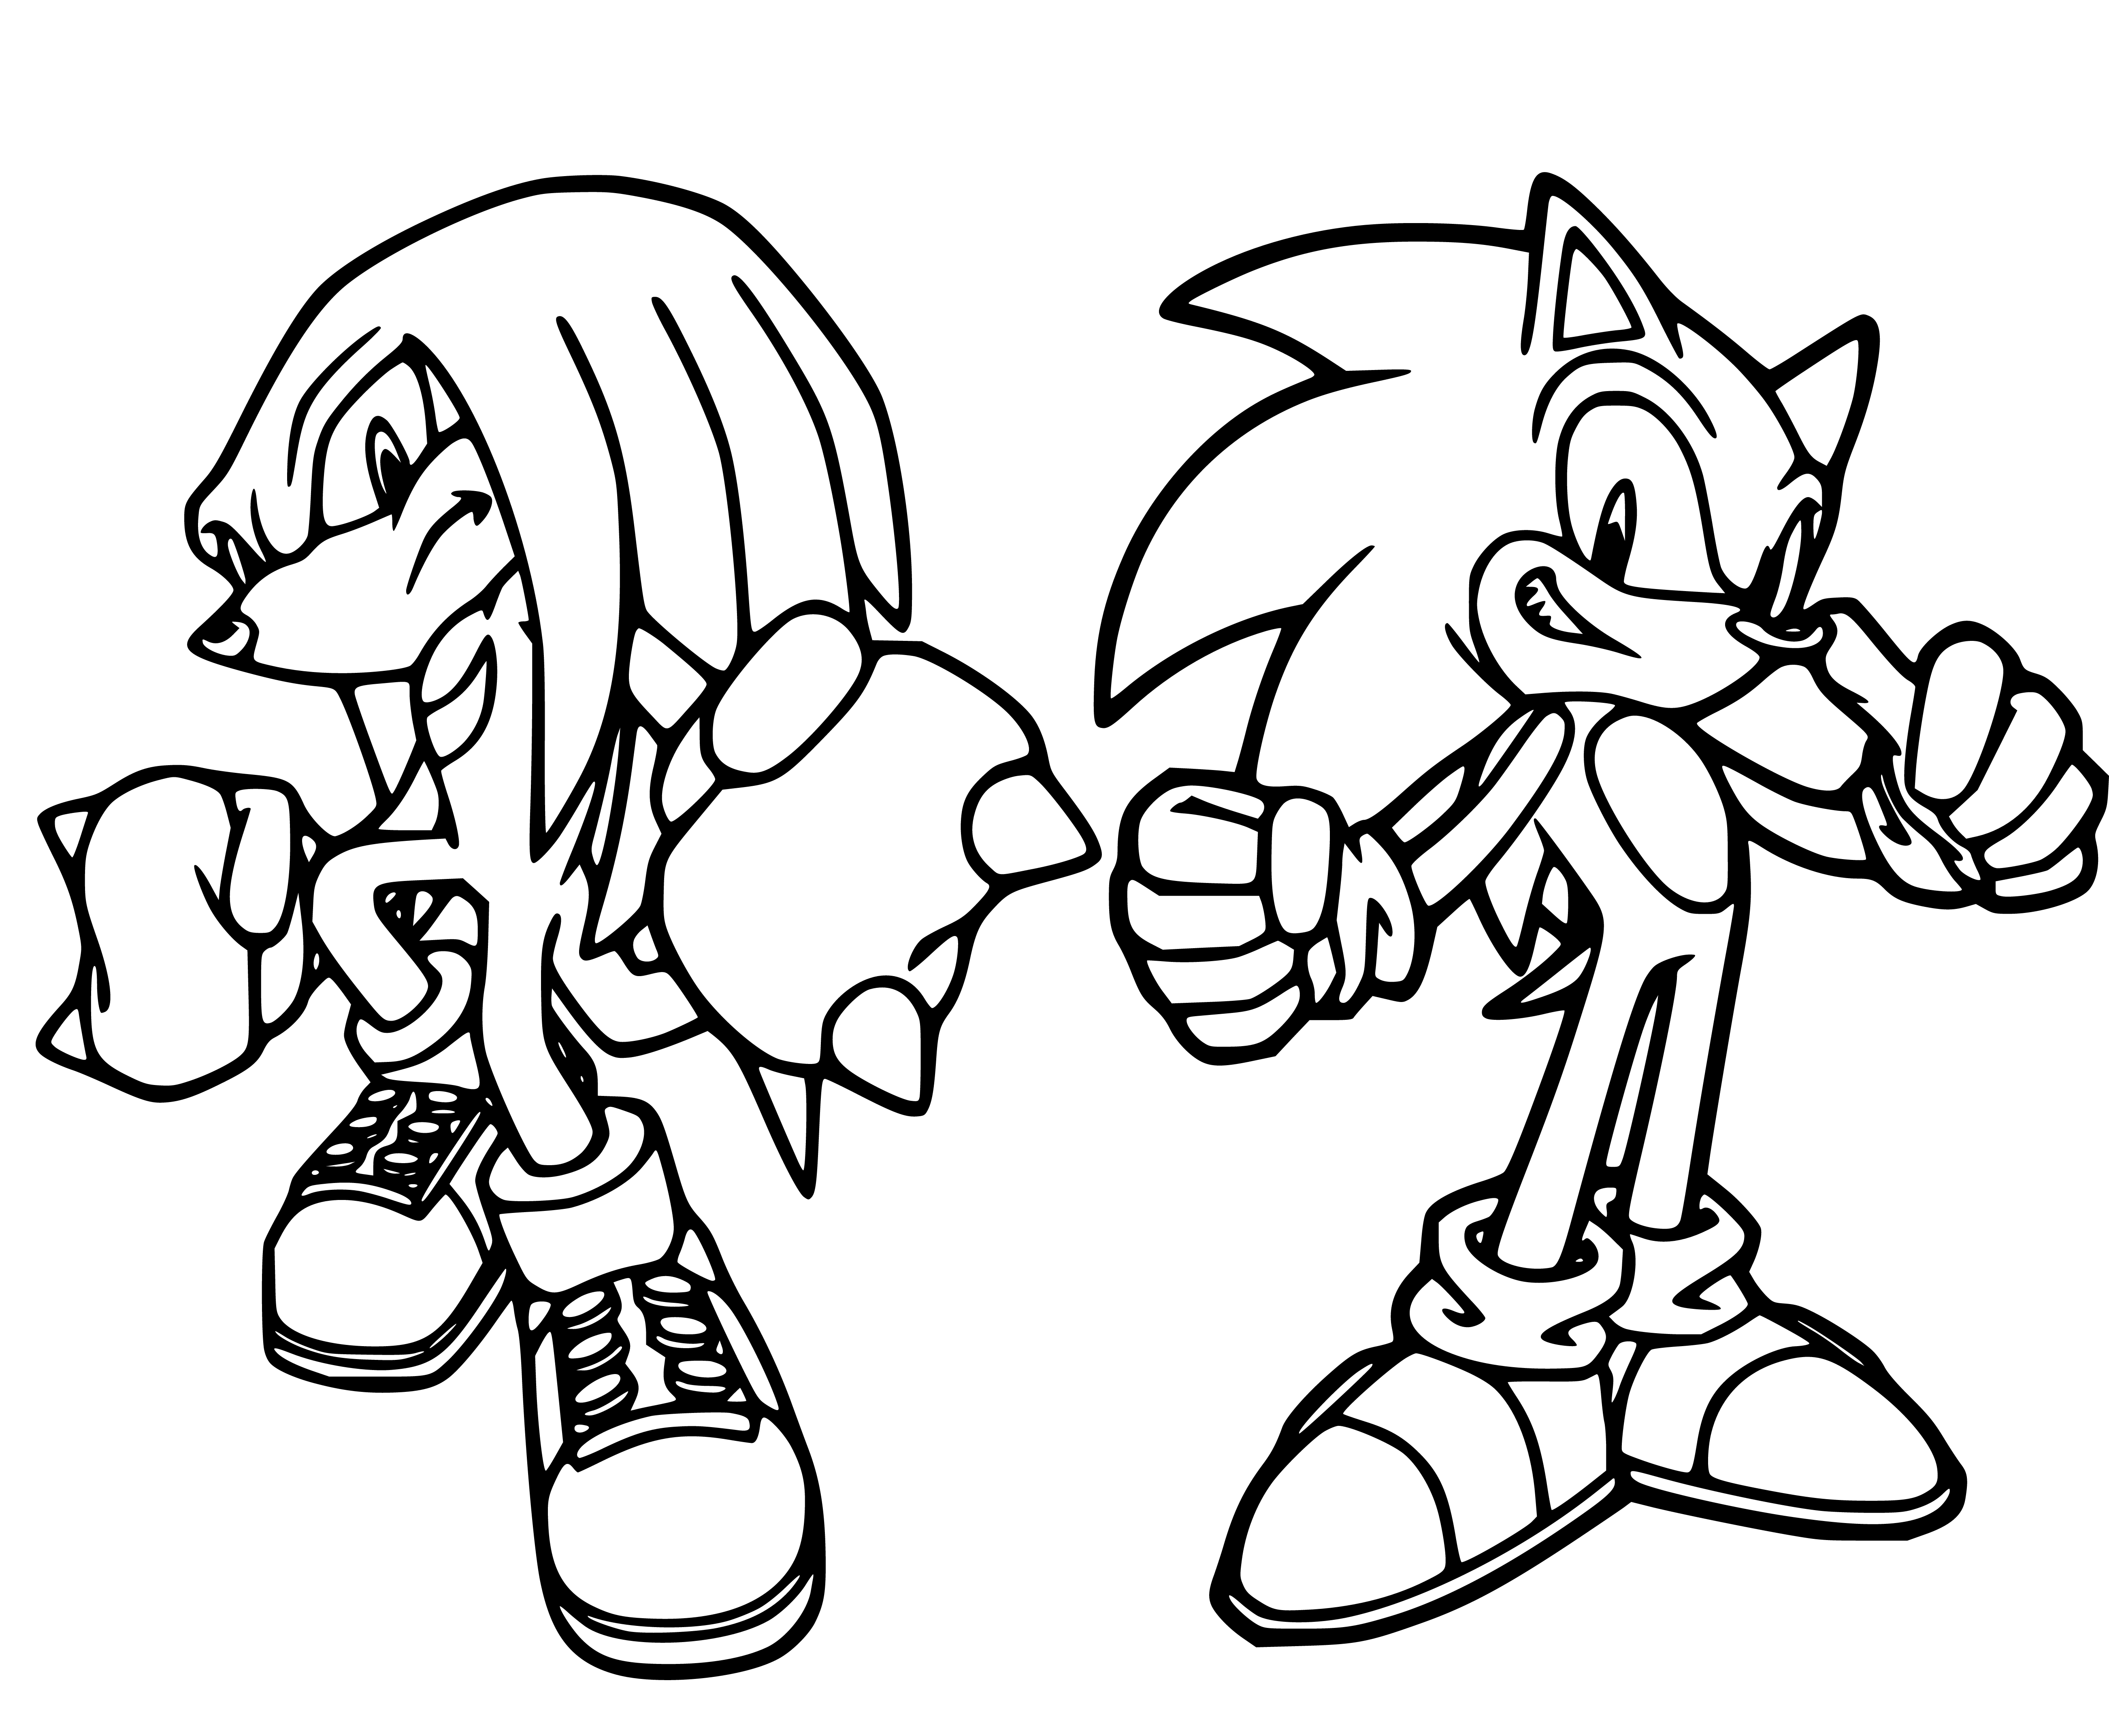 Knuckles and Sonic Coloring Pages for Kids - SheetalColor.com